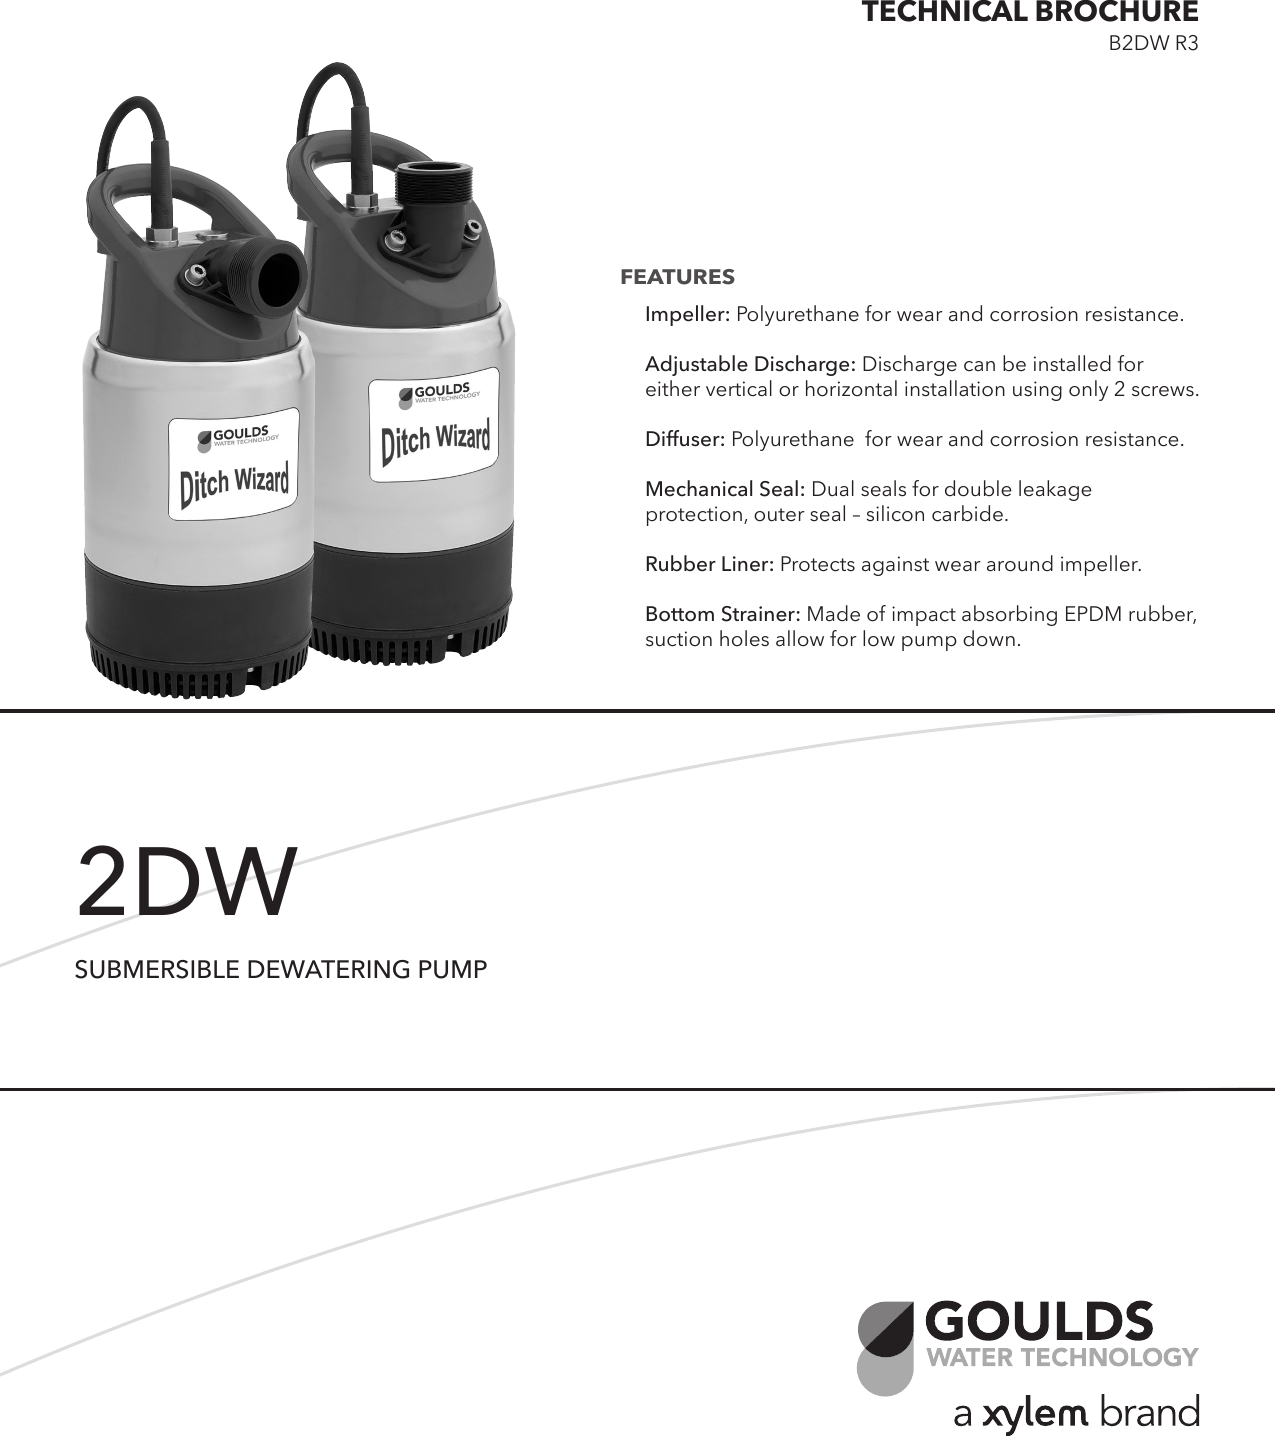 Page 1 of 4 - 538539 1 Goulds 2DW Dewatering Pump Brochure